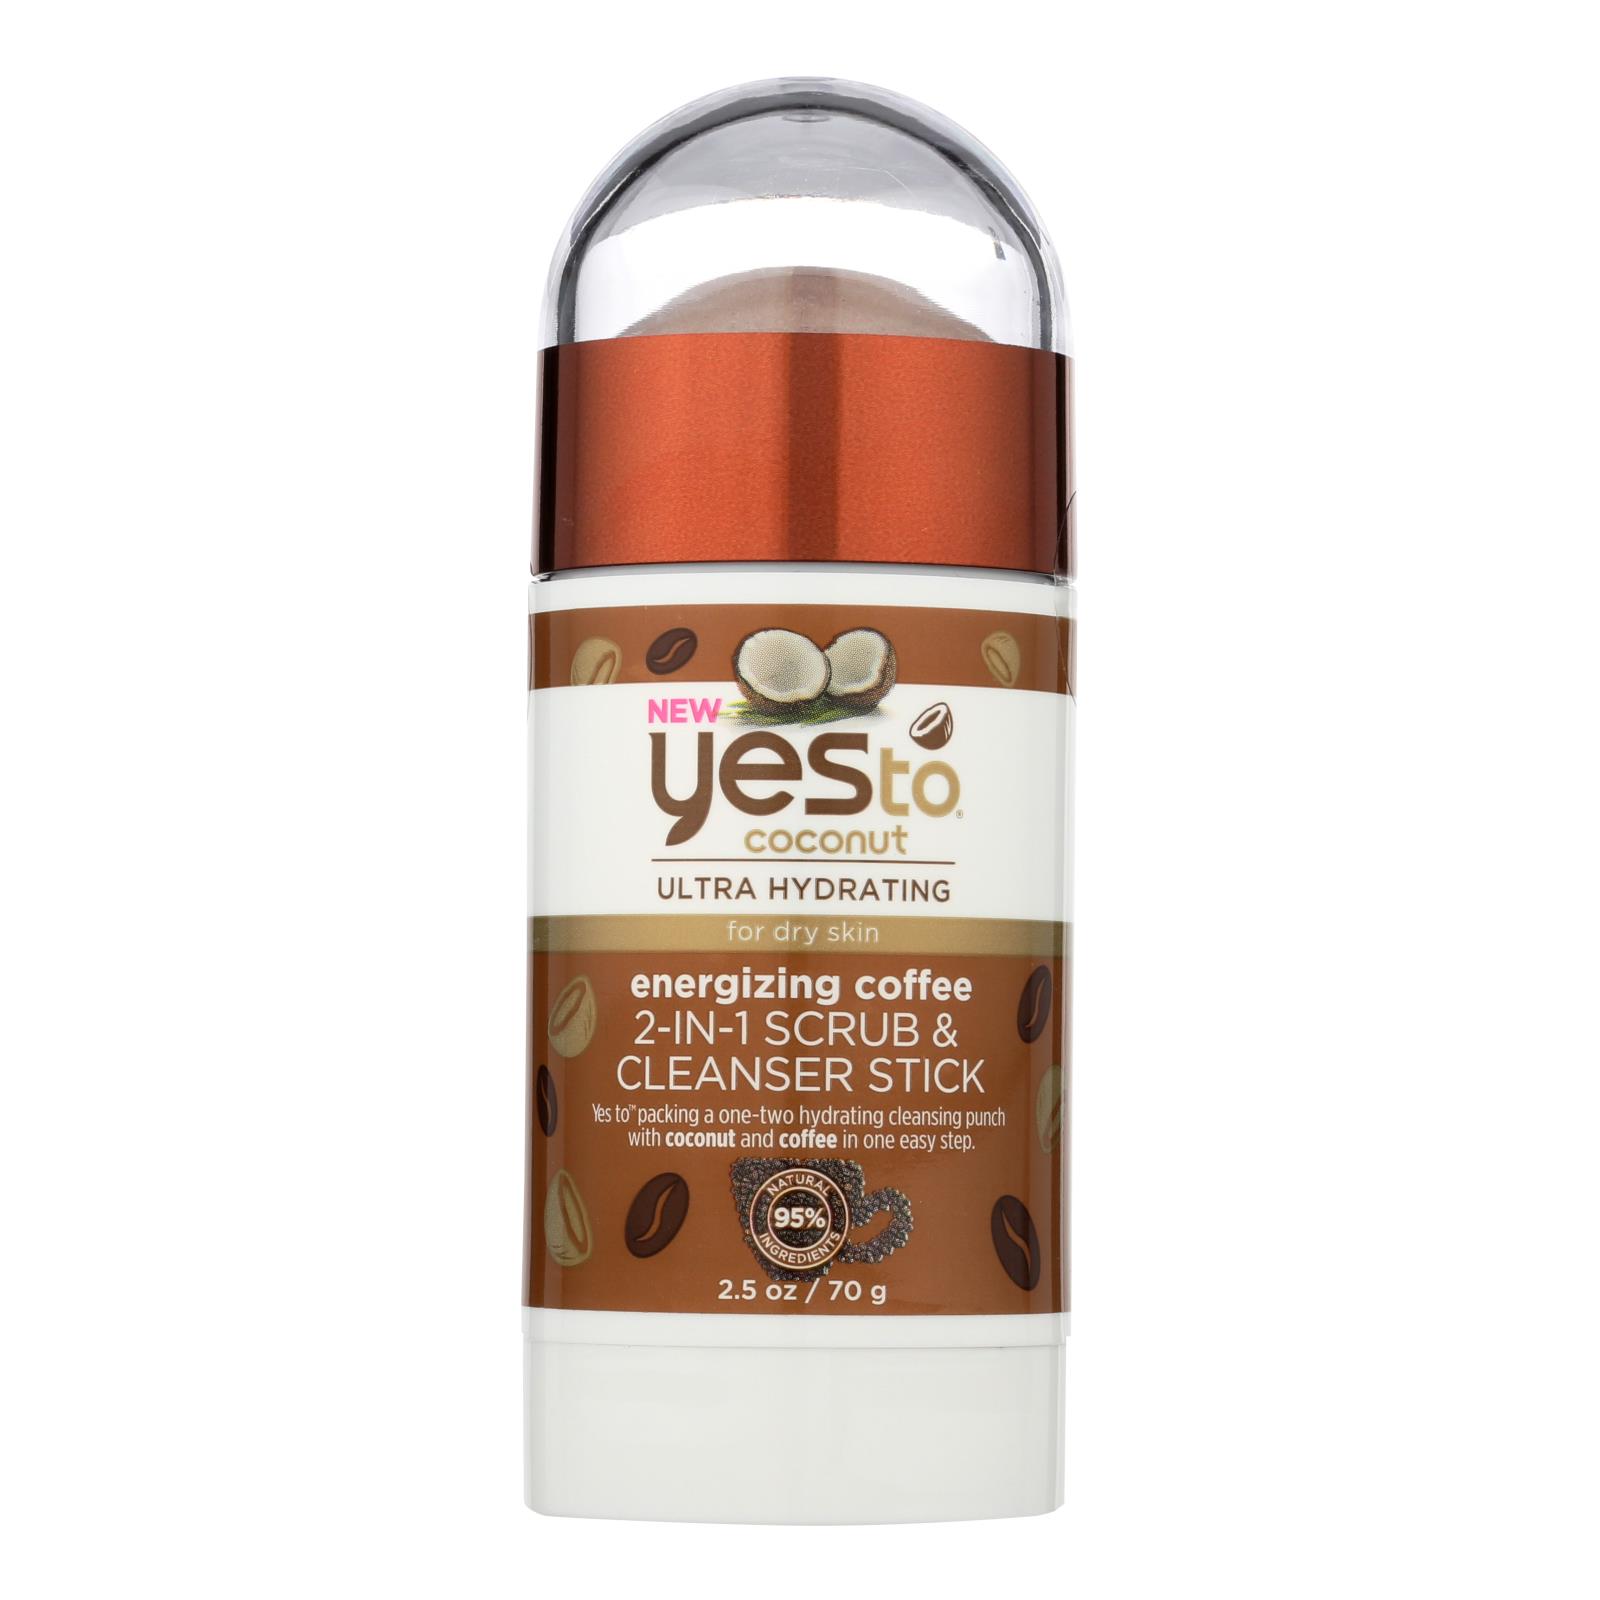 Yes To - Mask Coconut Engzng Coffee Stk - Case of 3 - 2.5 OZ